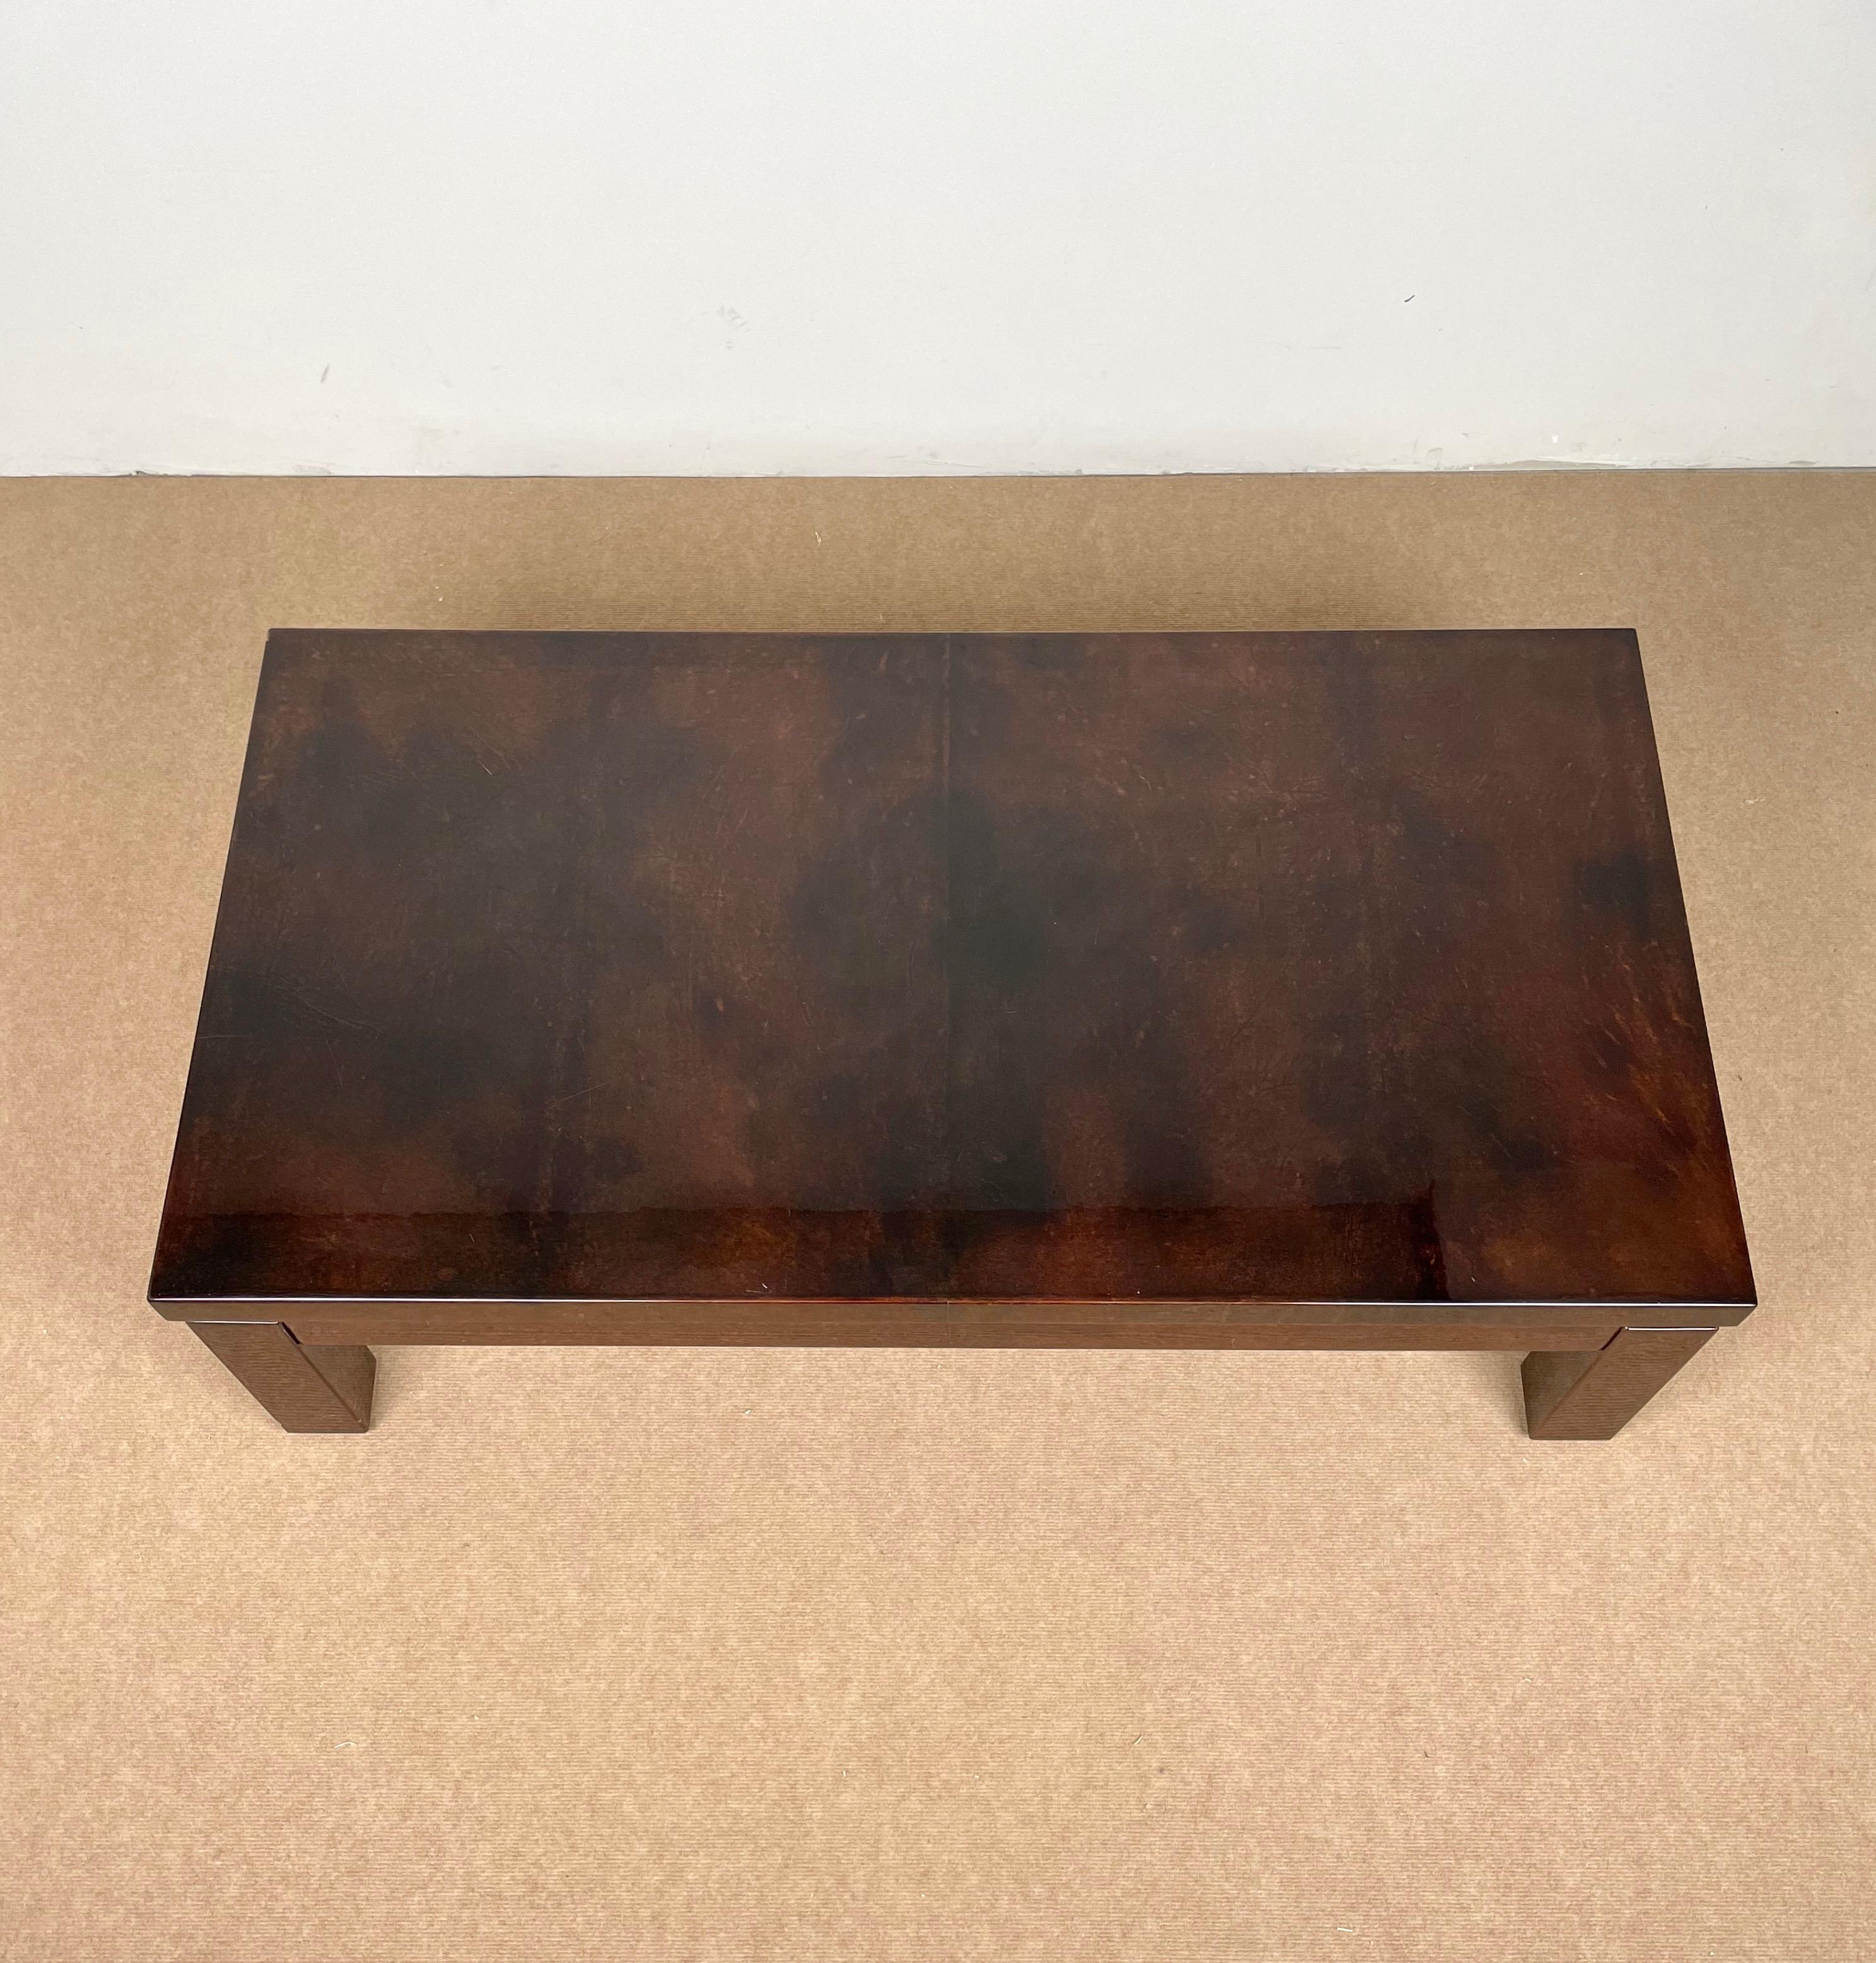 Rectangular coffee table in brown goatskin with brass details attributed to the Italian designer Aldo Tura. 

Made in Italy in the 1960s.